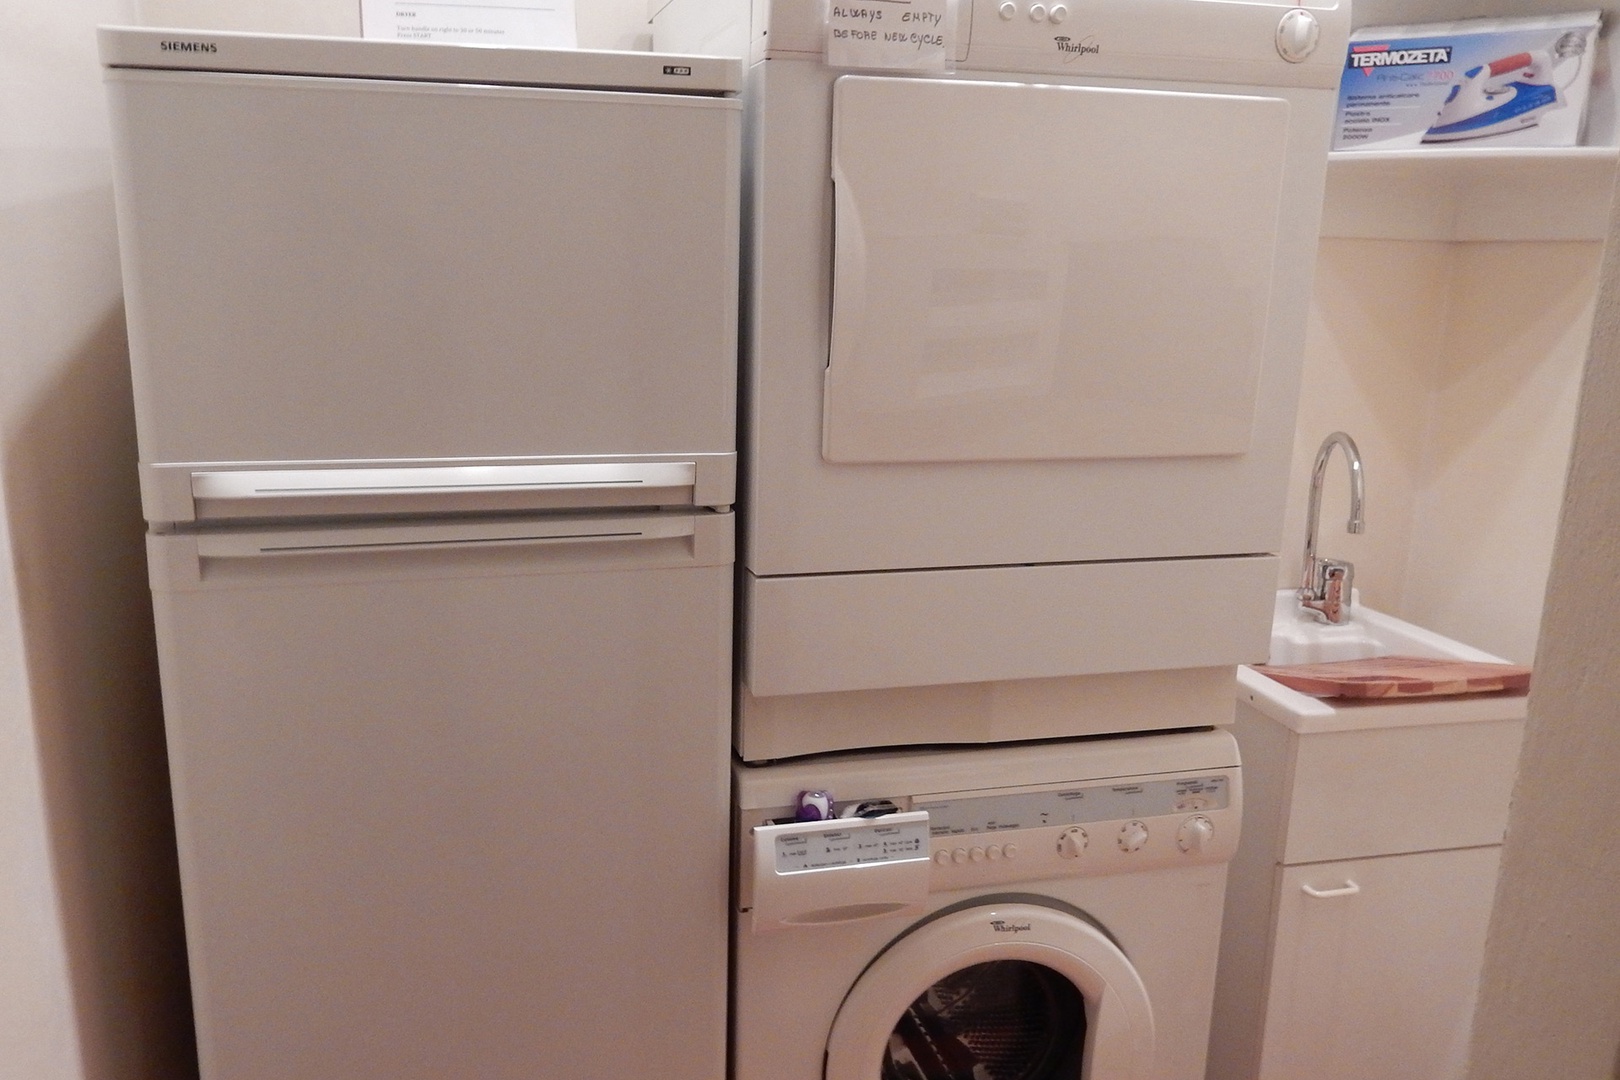 Refrigerator, washer and dryer in apartment.